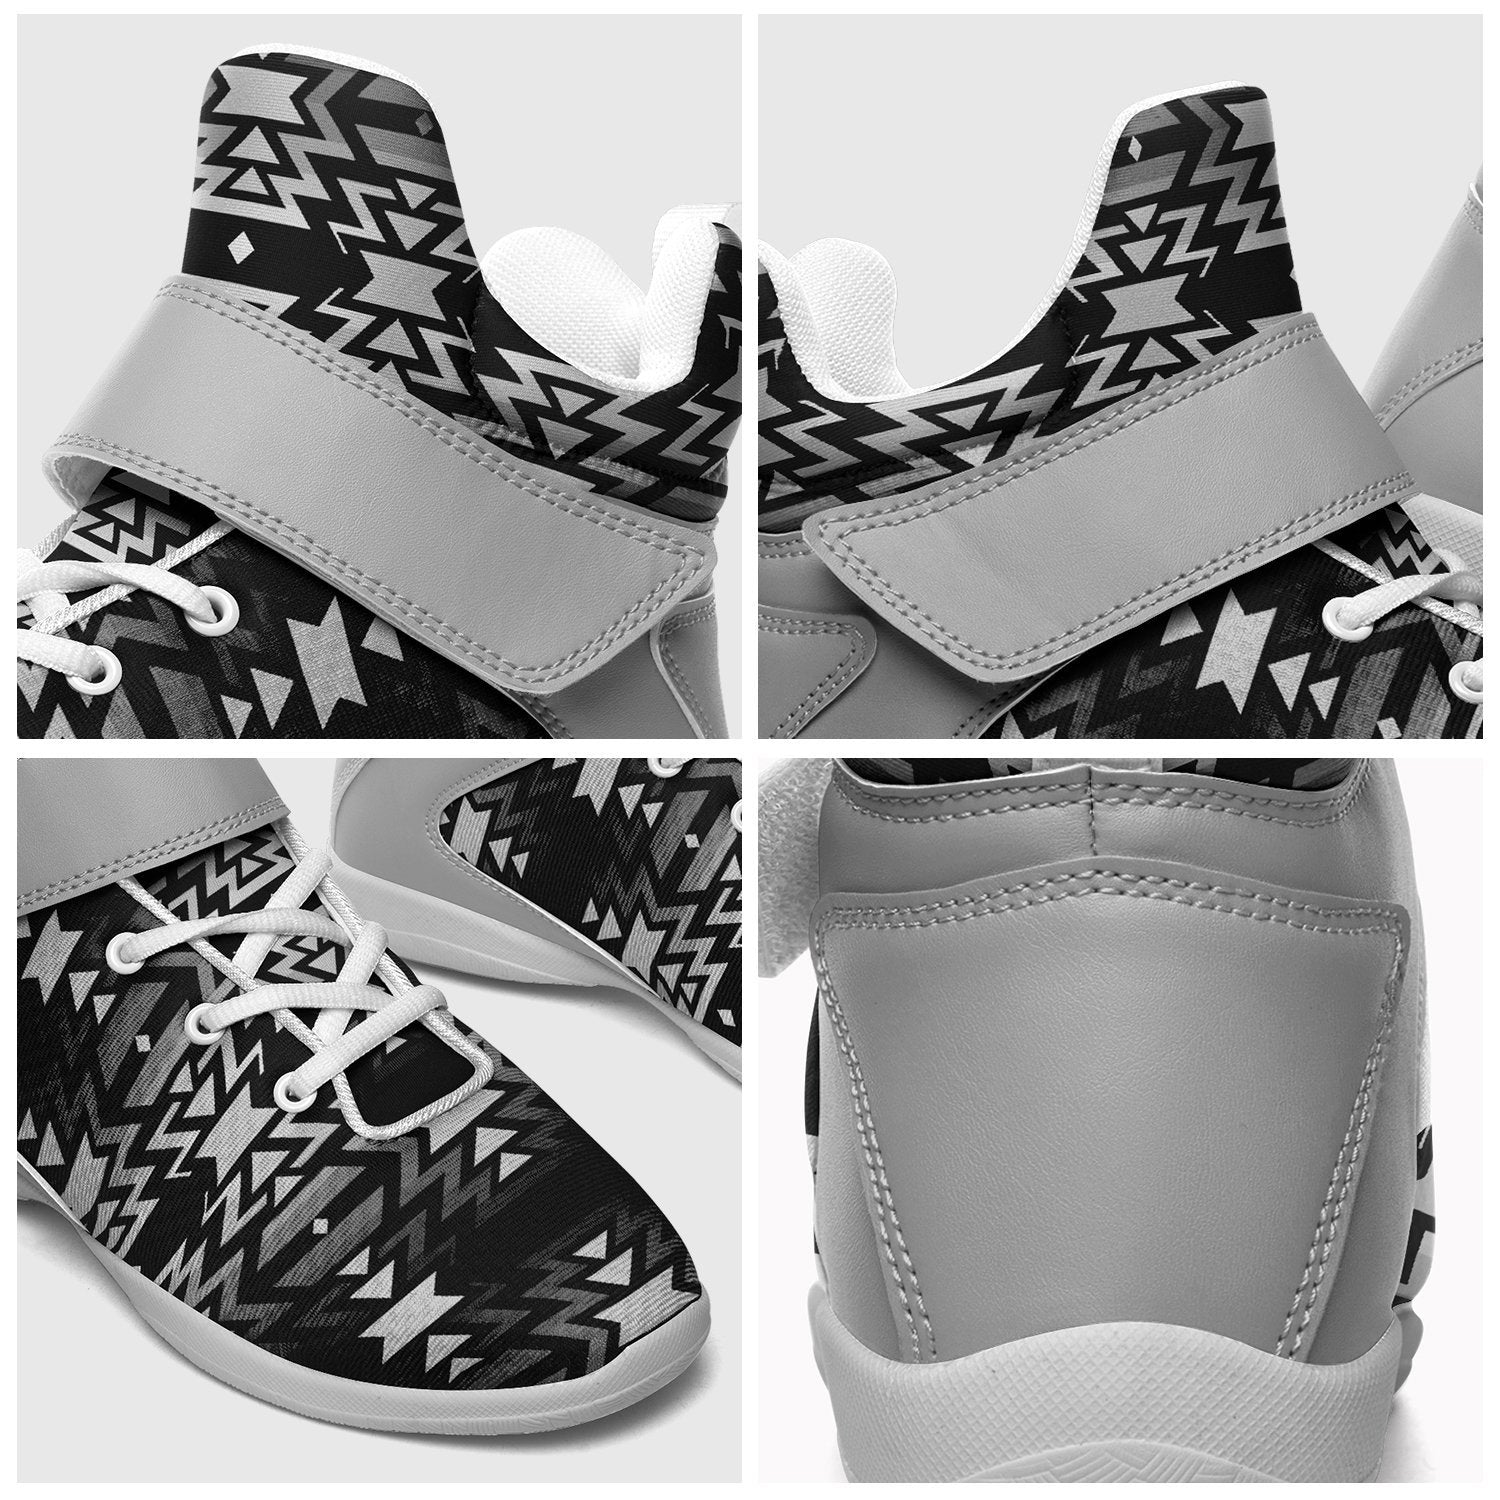 Black Fire Black and White Ipottaa Basketball / Sport High Top Shoes - White Sole 49 Dzine 